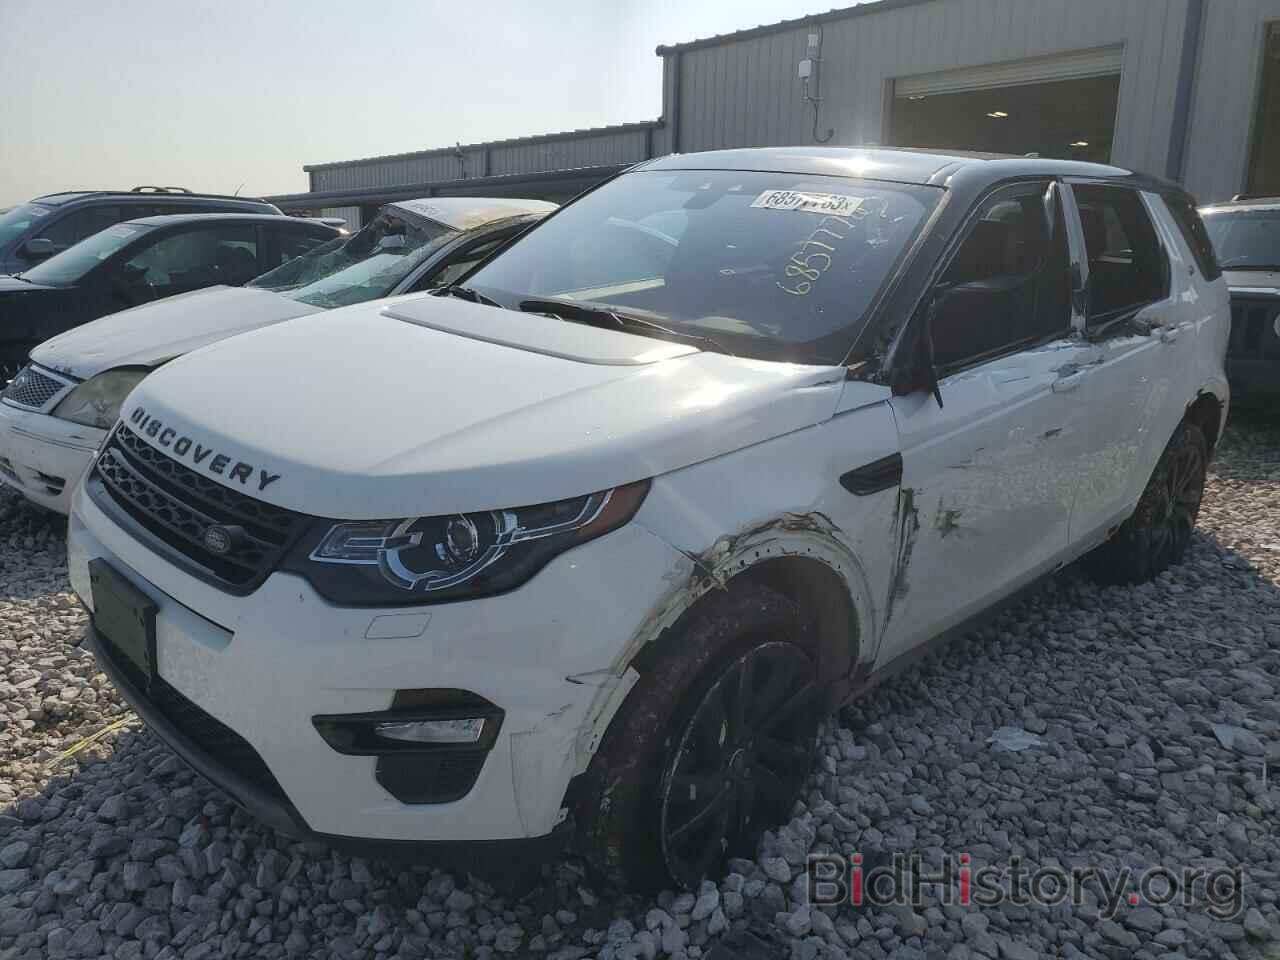 Фотография SALCT2RX6JH750501 - LAND ROVER DISCOVERY 2018